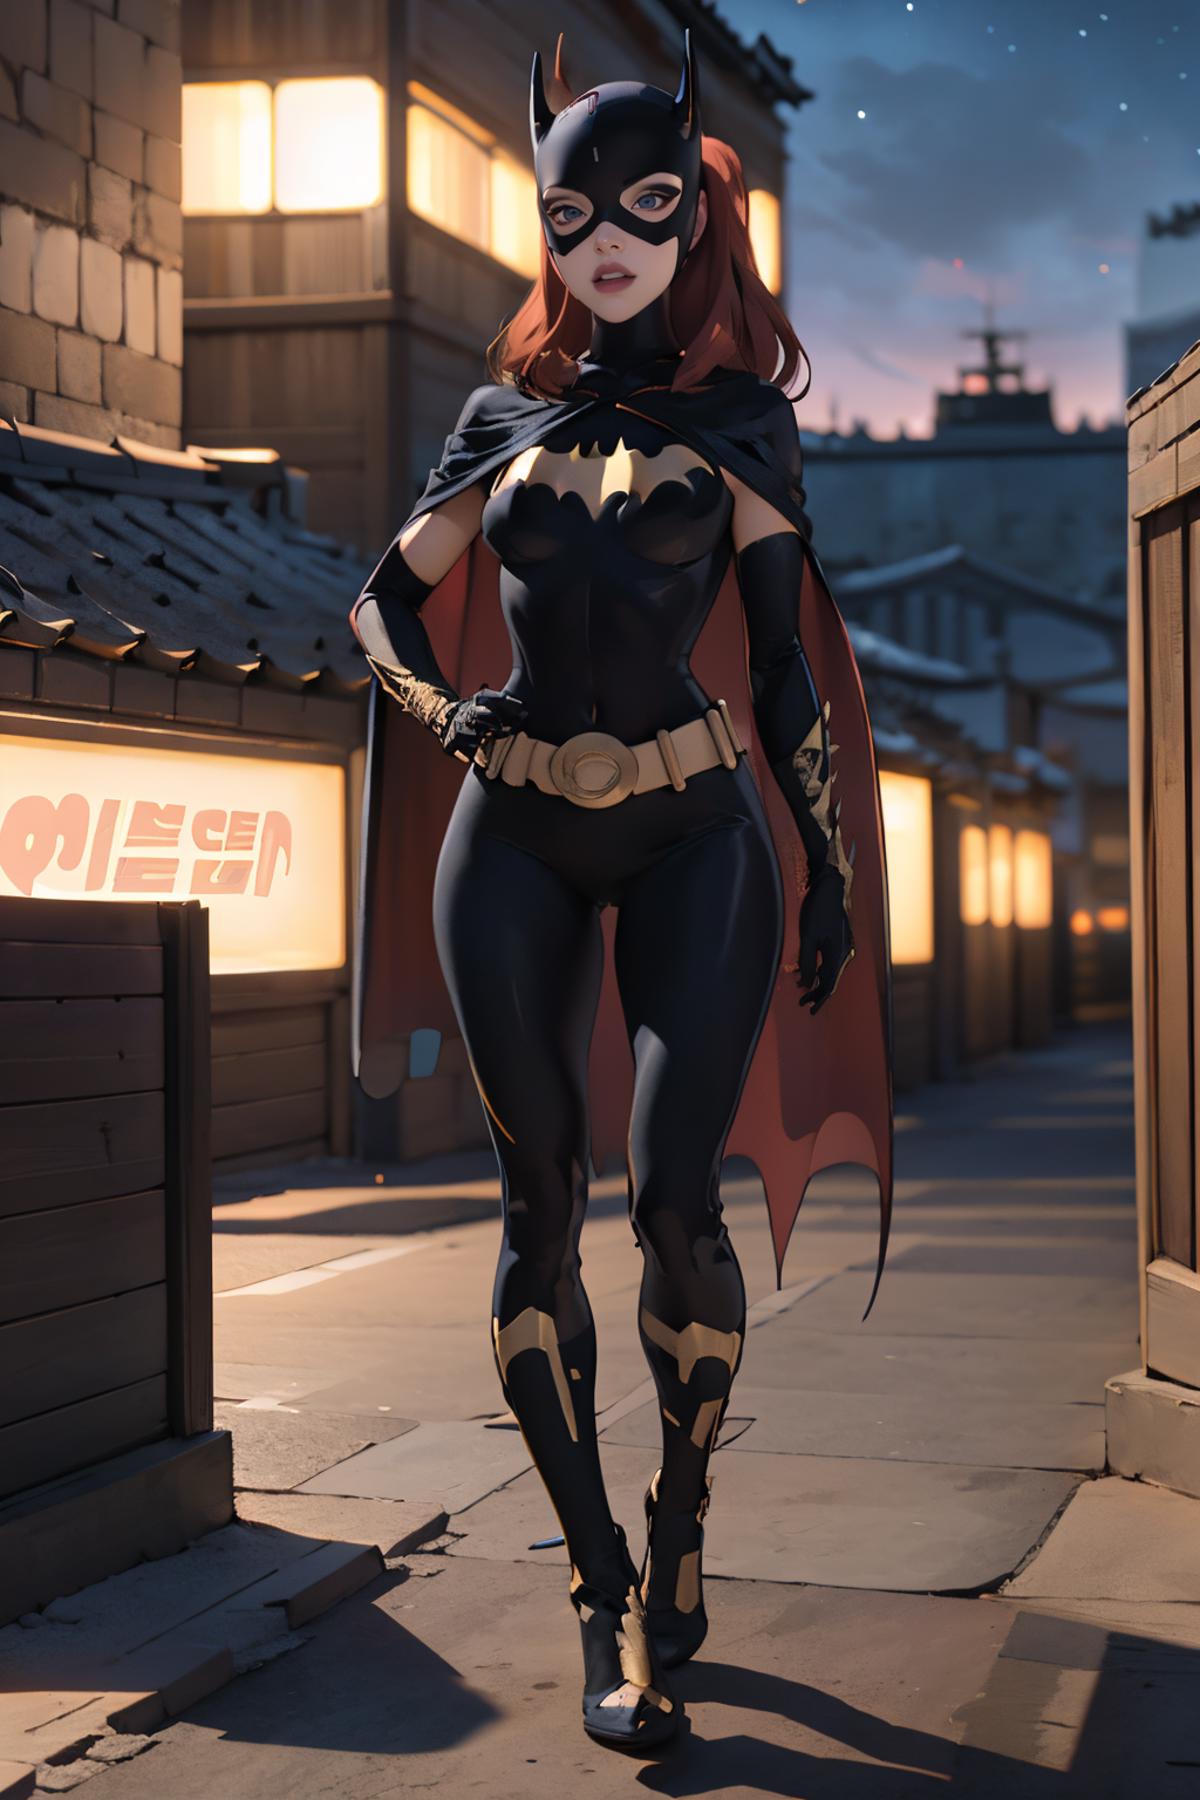 A Batgirl character in a black and gold costume standing in front of a building.